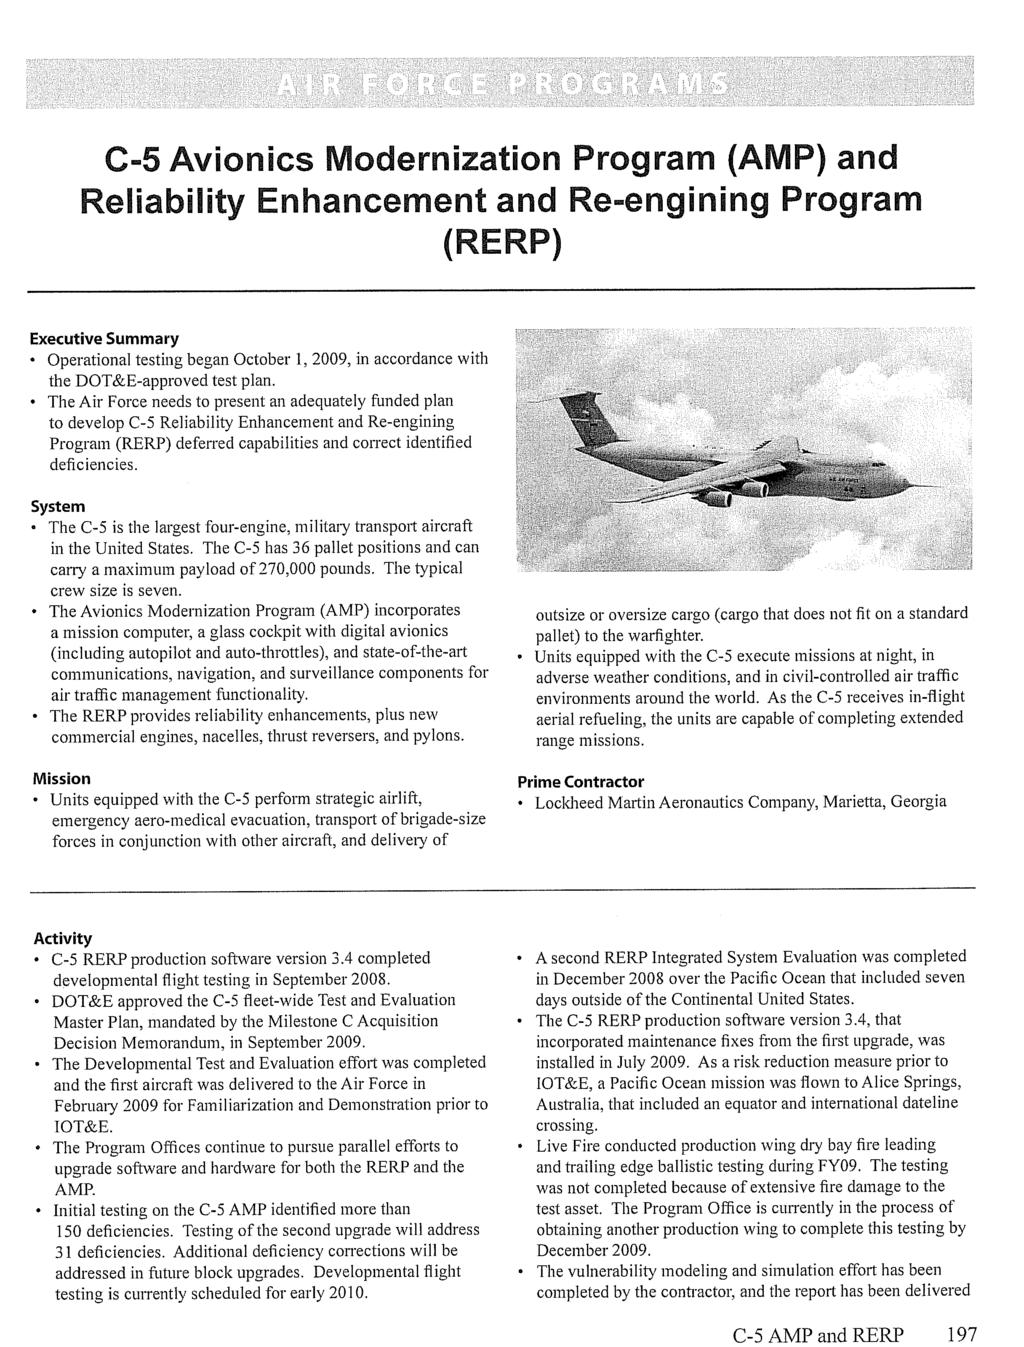 C-5 AMP and RERP 197 C-5 Avionics Modernization Program (AMP) and Reliability enhancement and Re-engining Program (RERP) Executive Summary Operational testing began October 1, 2009, in accordance